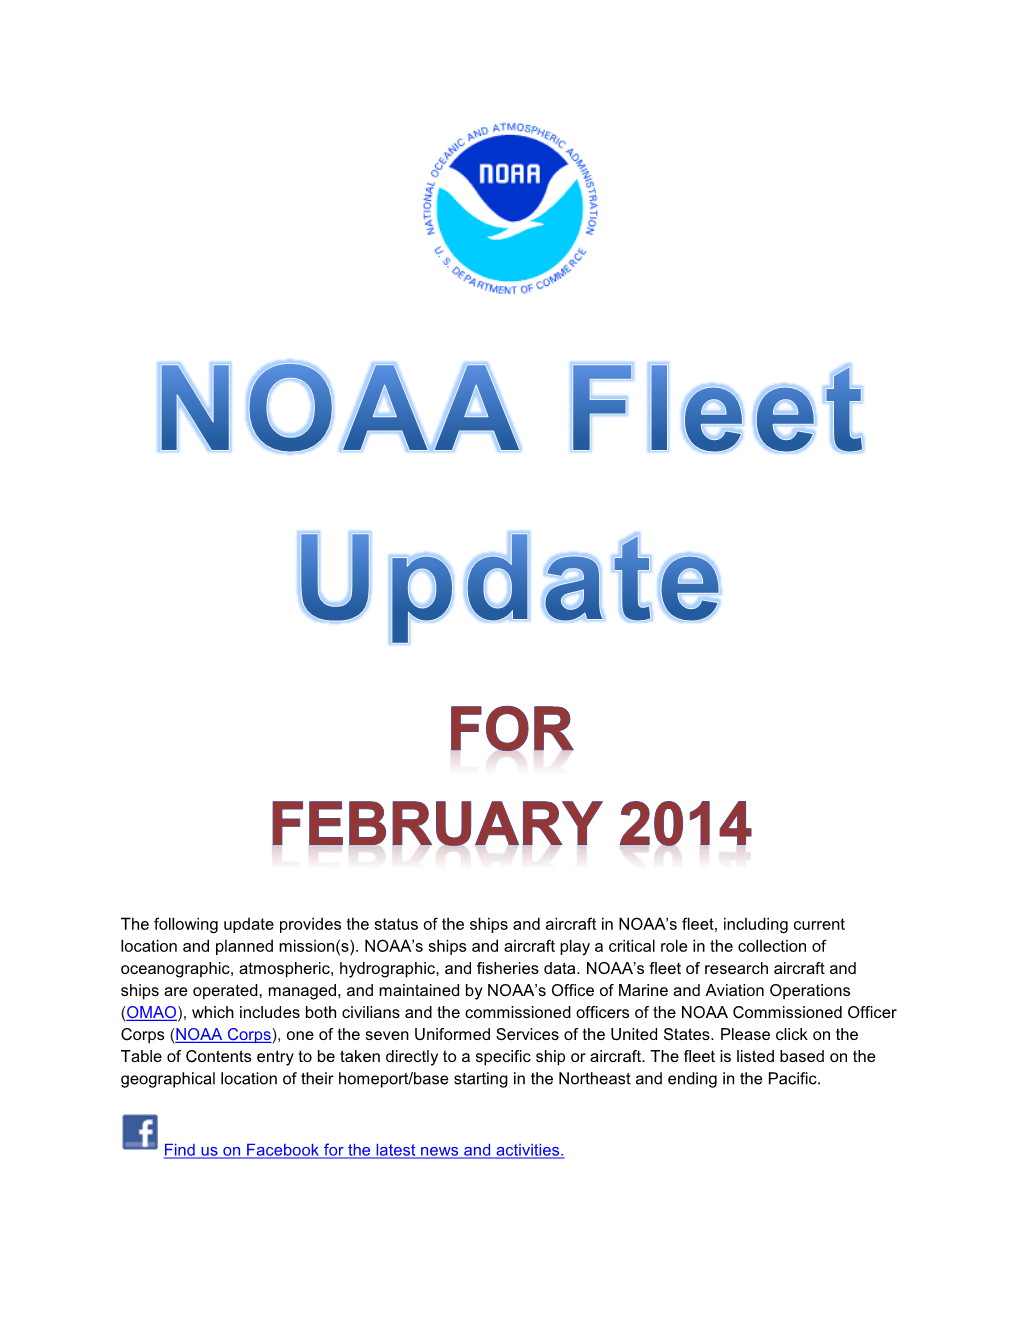 The Following Update Provides the Status of the Ships and Aircraft in NOAA’S Fleet, Including Current Location and Planned Mission(S)